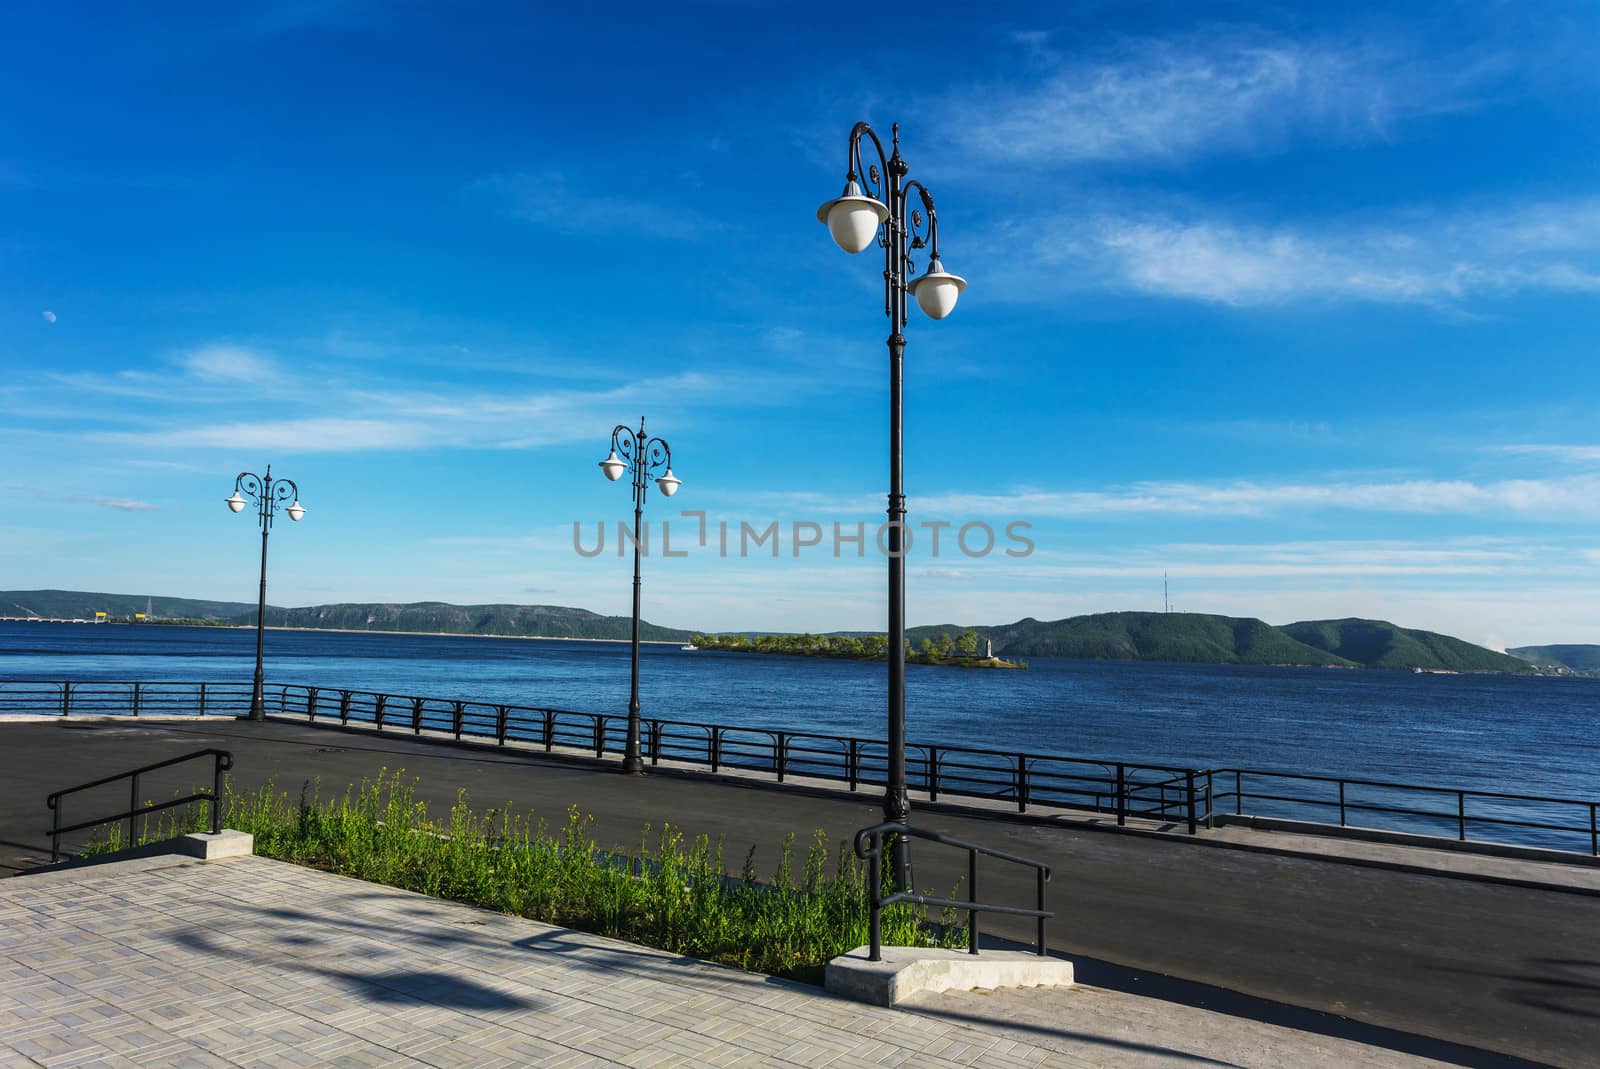 Street lights on the promenade on the shore of the great river